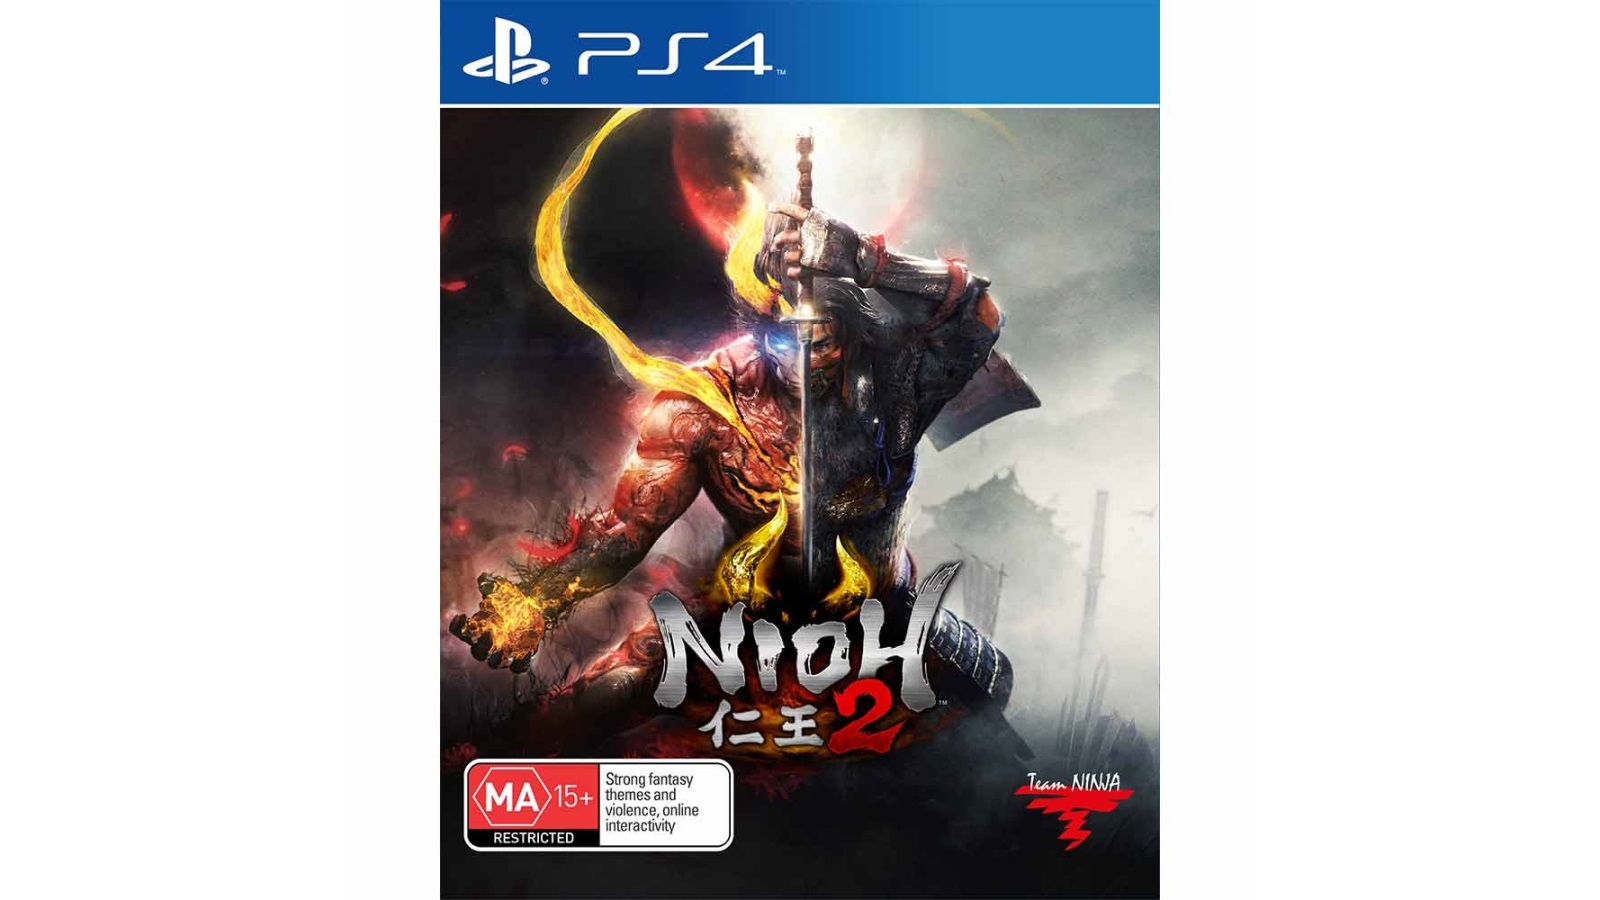 PlayStation Plus Monthly Games for November: Nioh 2, Lego Harry Potter  Collection, Heavenly Bodies – PlayStation.Blog